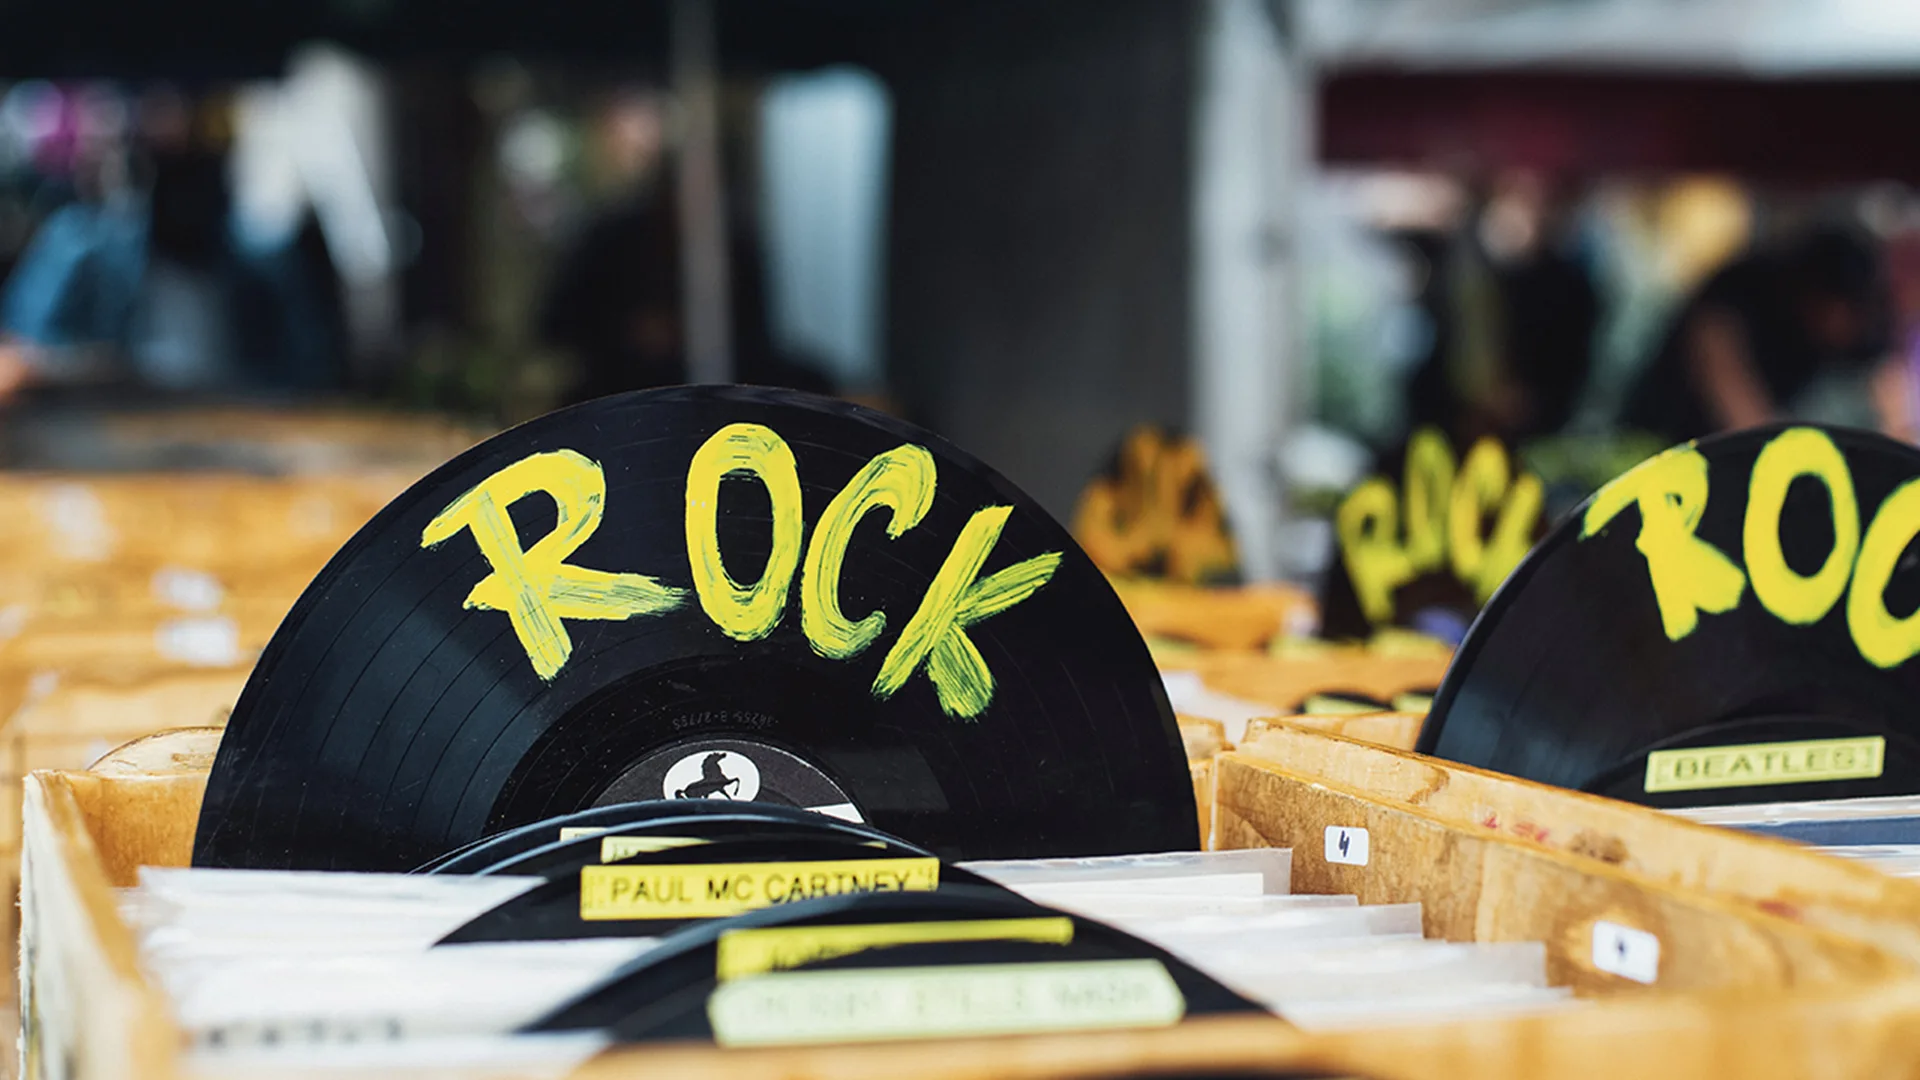 A record shop with a record which has Rock written on it in yellow